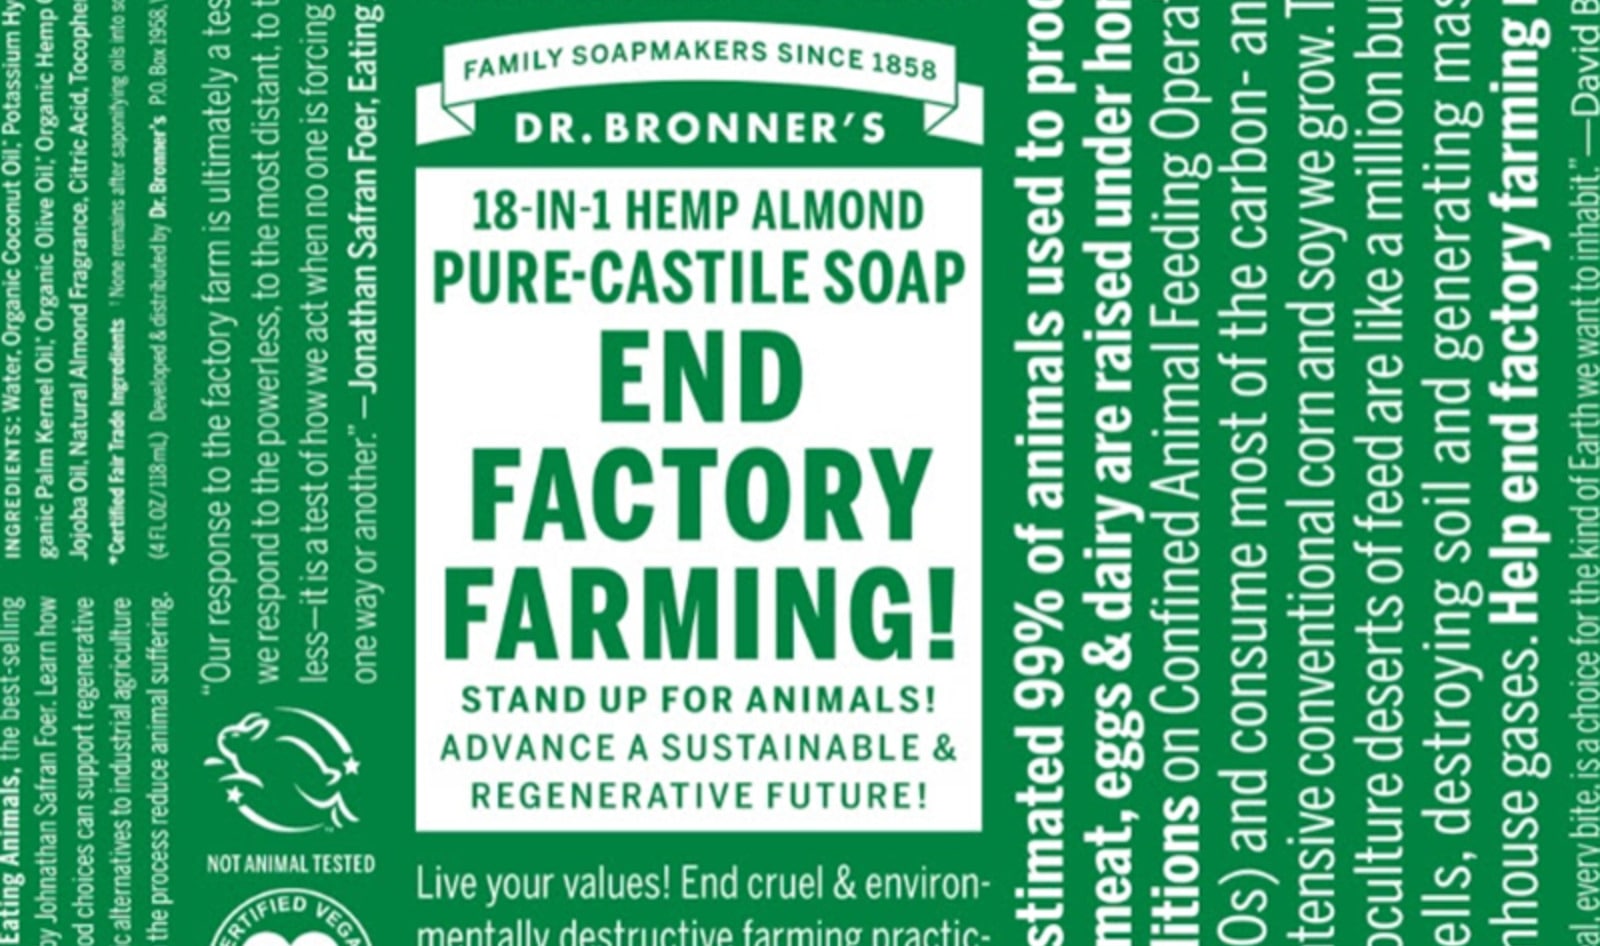 Dr. Bronner’s Debuts New “End Factory Farming!” Label